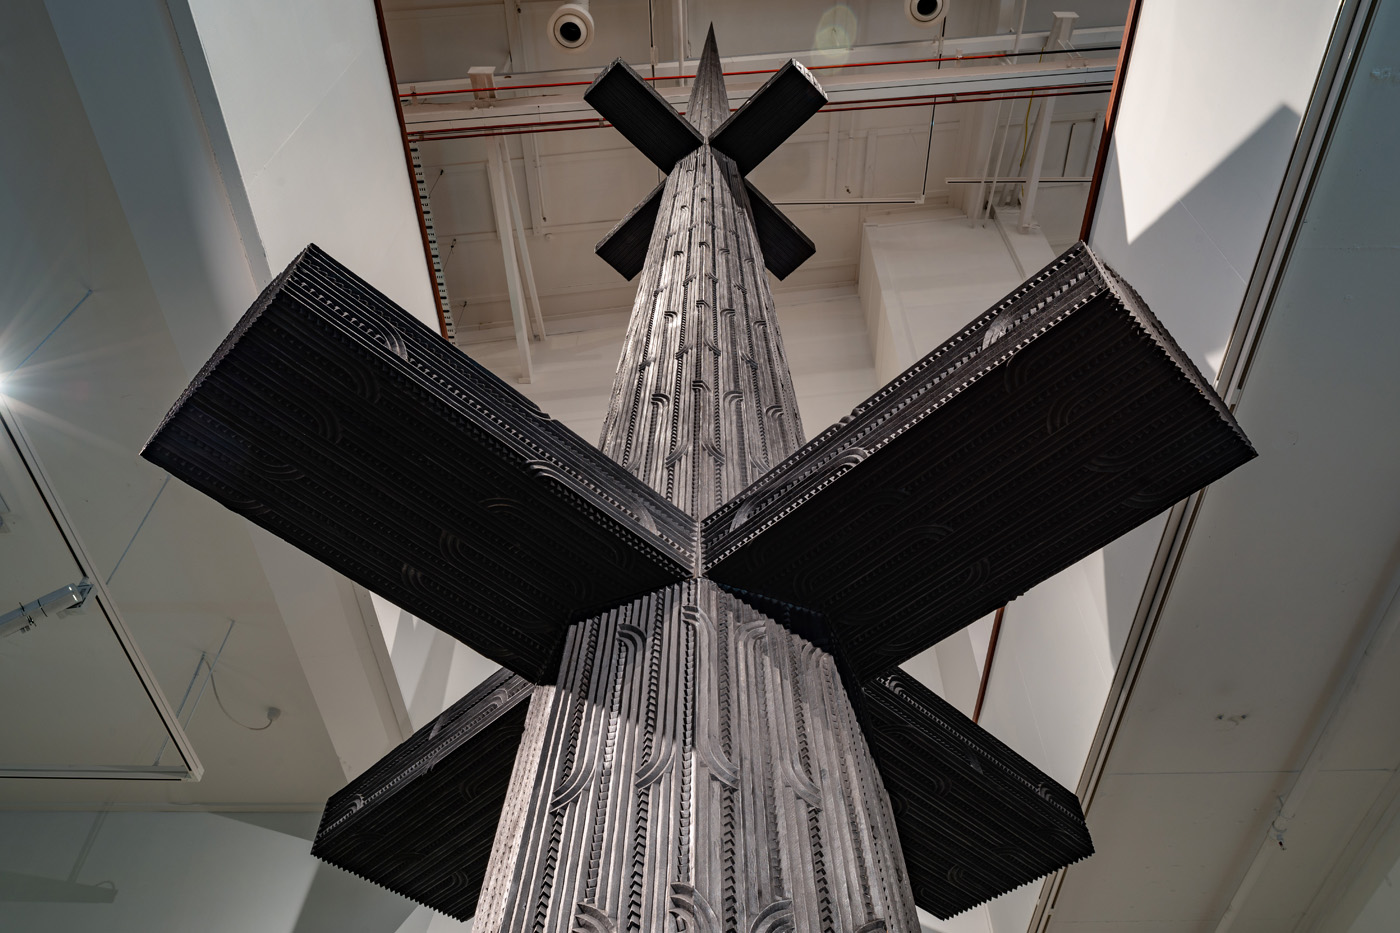 Image of Brett Graham's carved niu pole work titled Cease Tide of Wrongdoing - an intricately carved black kauri work that stands almost 10m tall in the Govett-Brewster Art Gallery, rising to a spike.